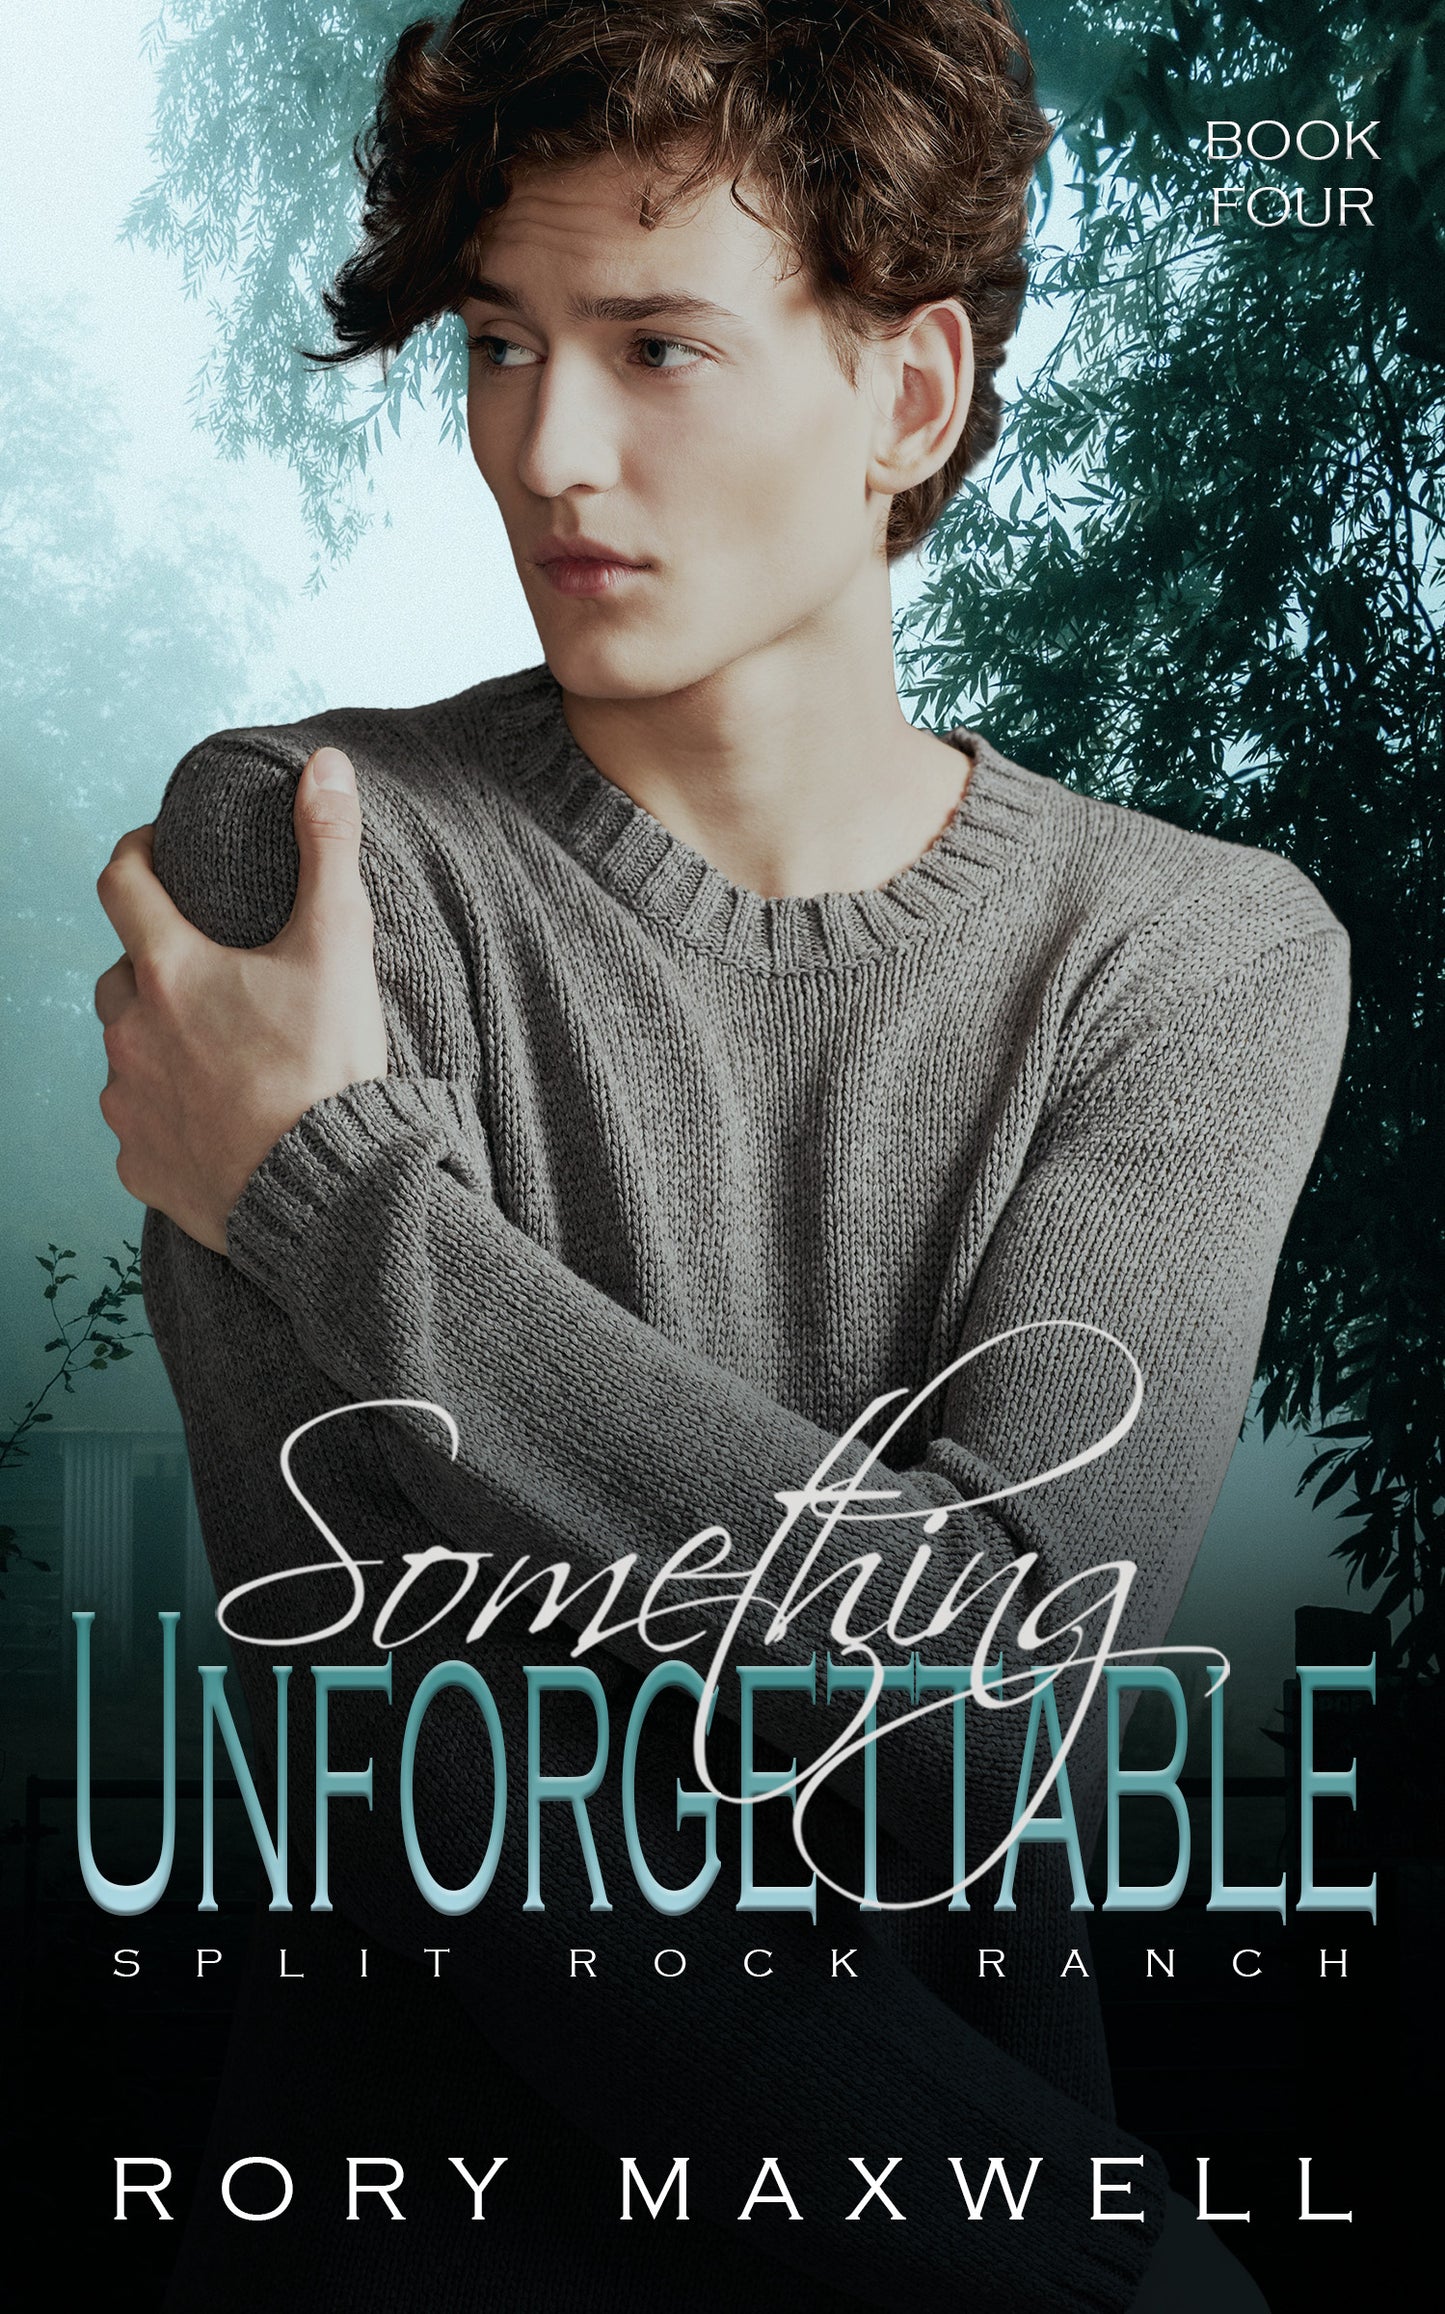 (Signed Paperback) Book 4 - Something Unforgettable: An MM Daddy Romance